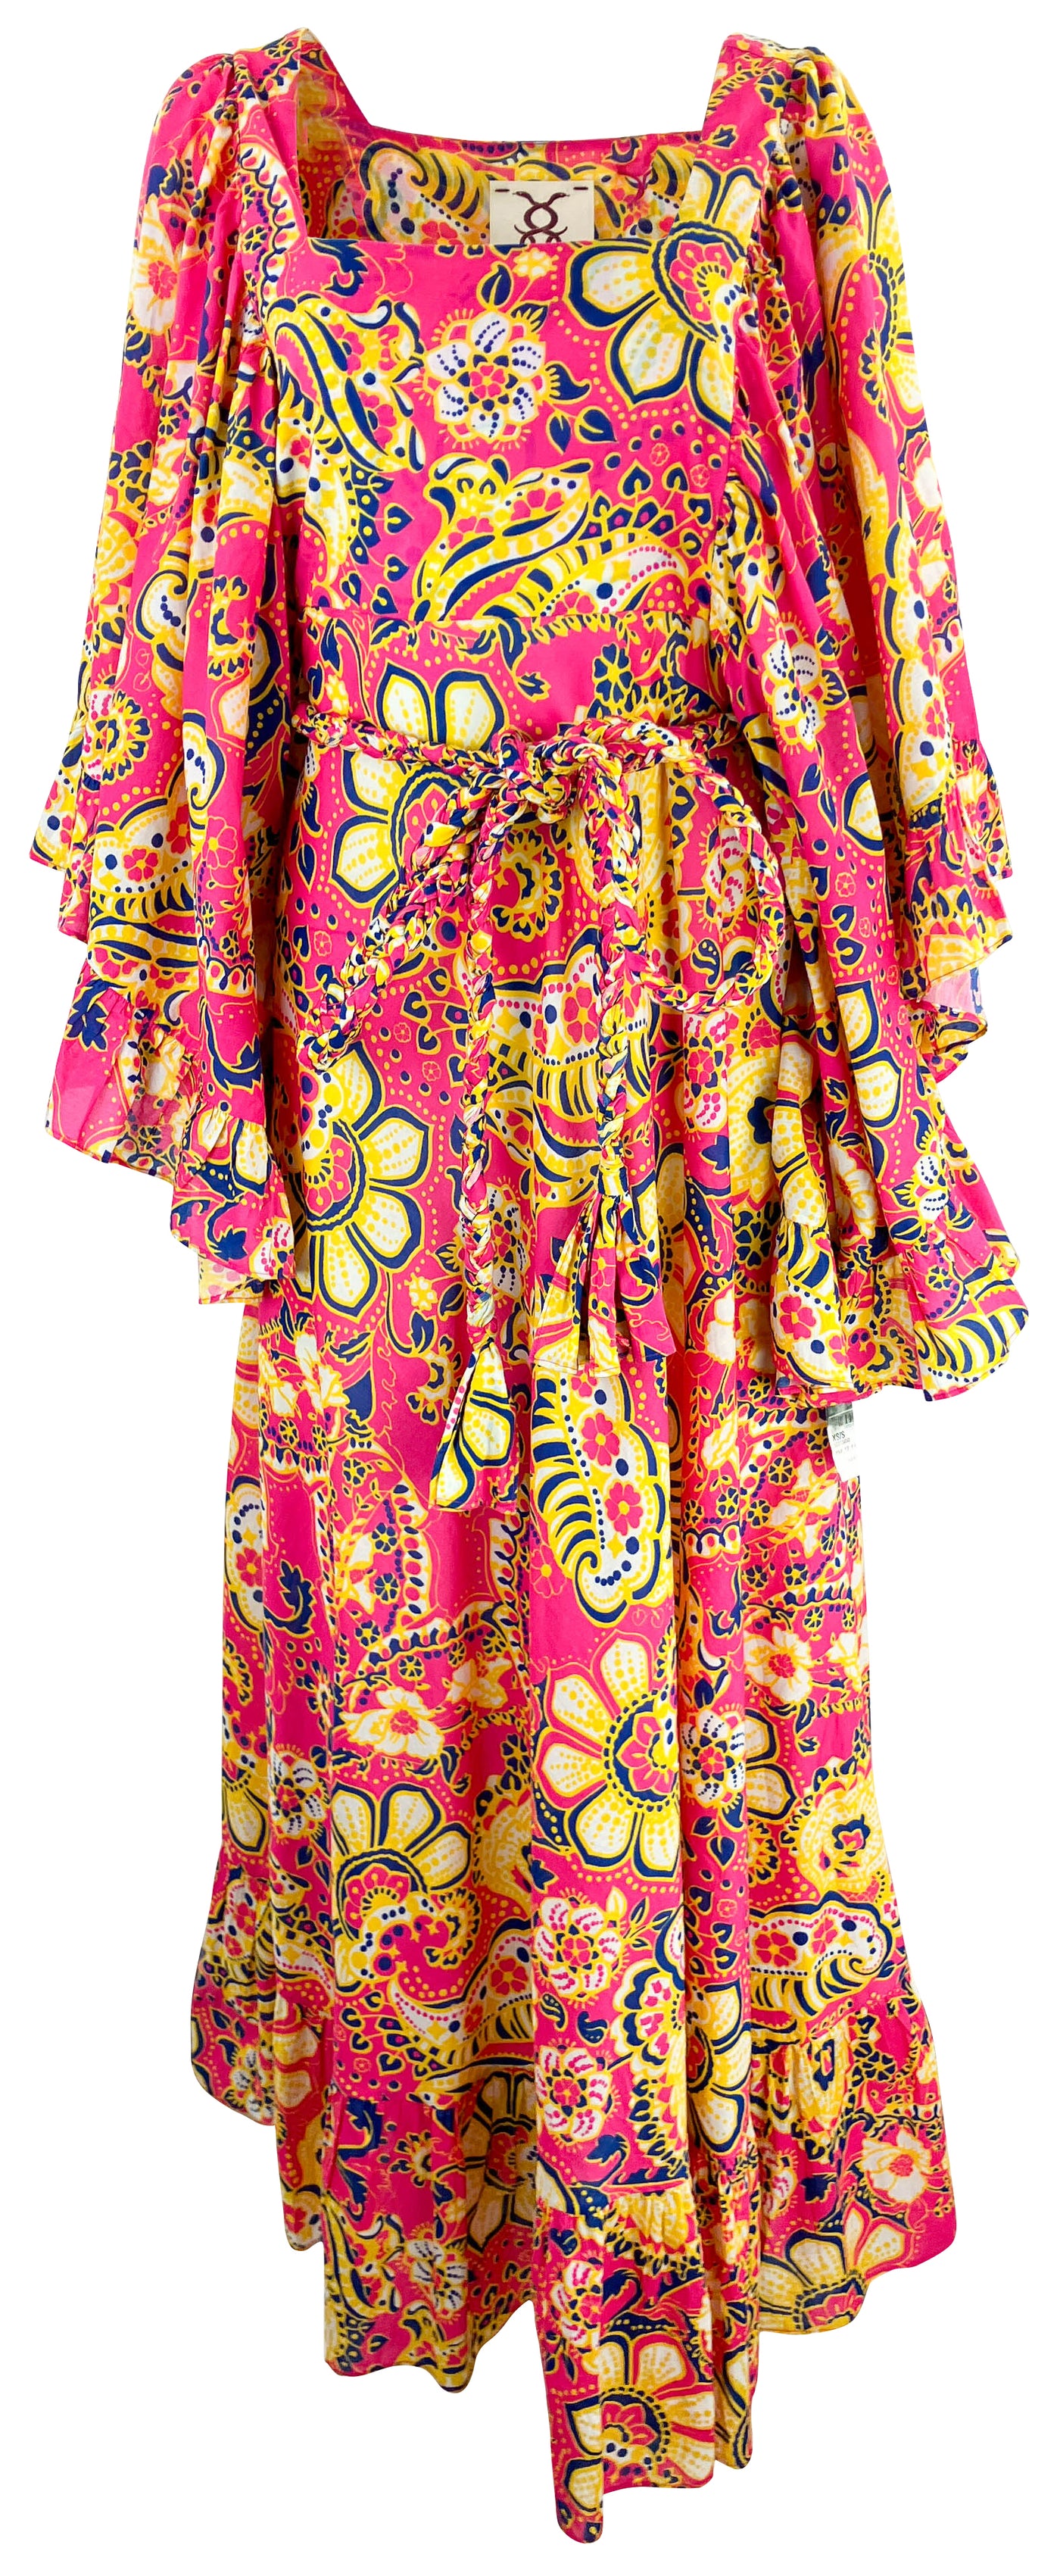 Figue Elissa Dress in Pink/Yellow Paisley Print - Discounts on Figue at UAL